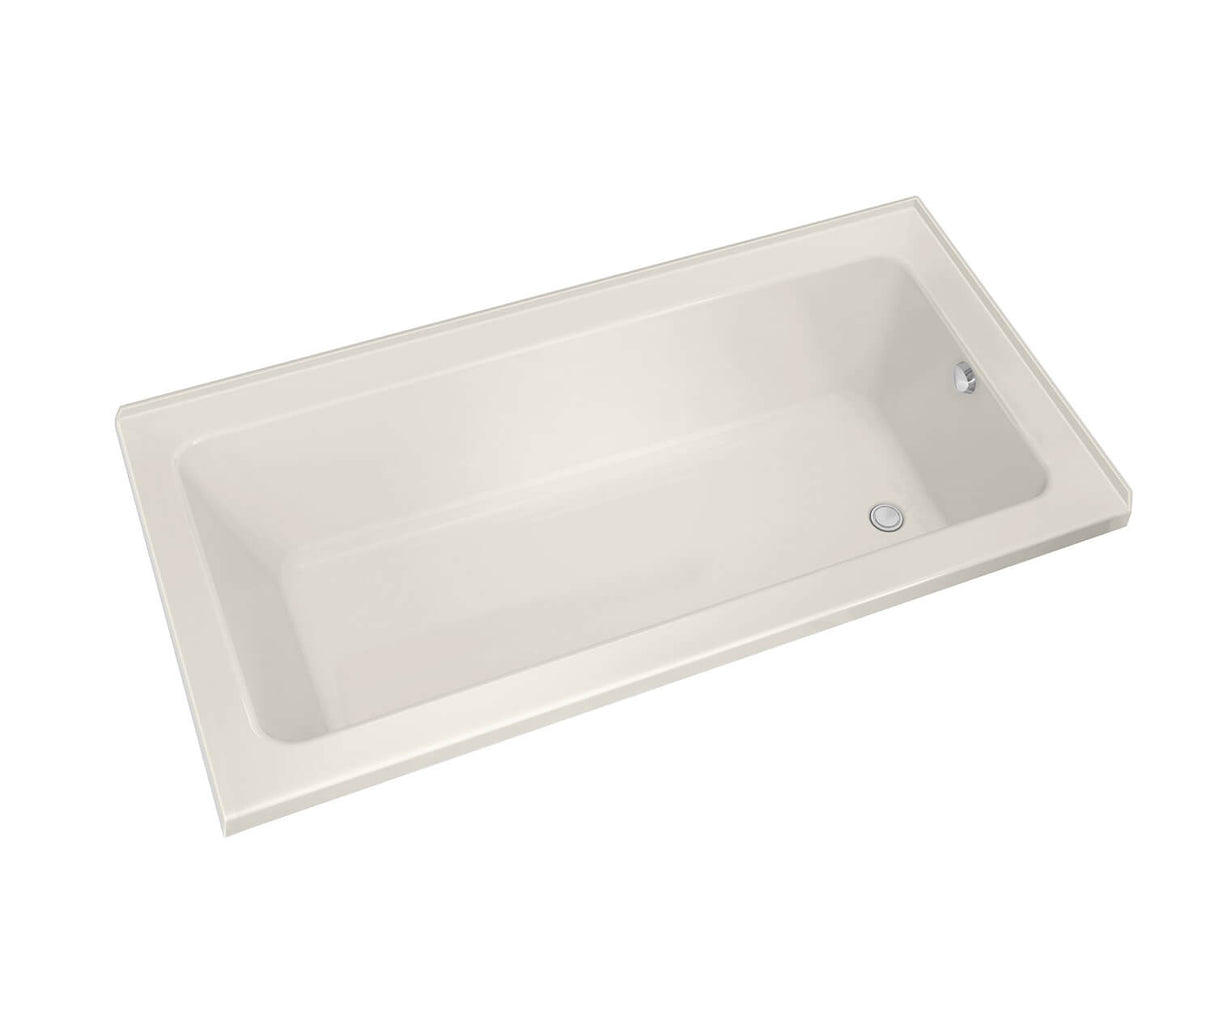 MAAX 106209-L-003-007 Pose 6636 IF Acrylic Corner Right Left-Hand Drain Whirlpool Bathtub in Biscuit